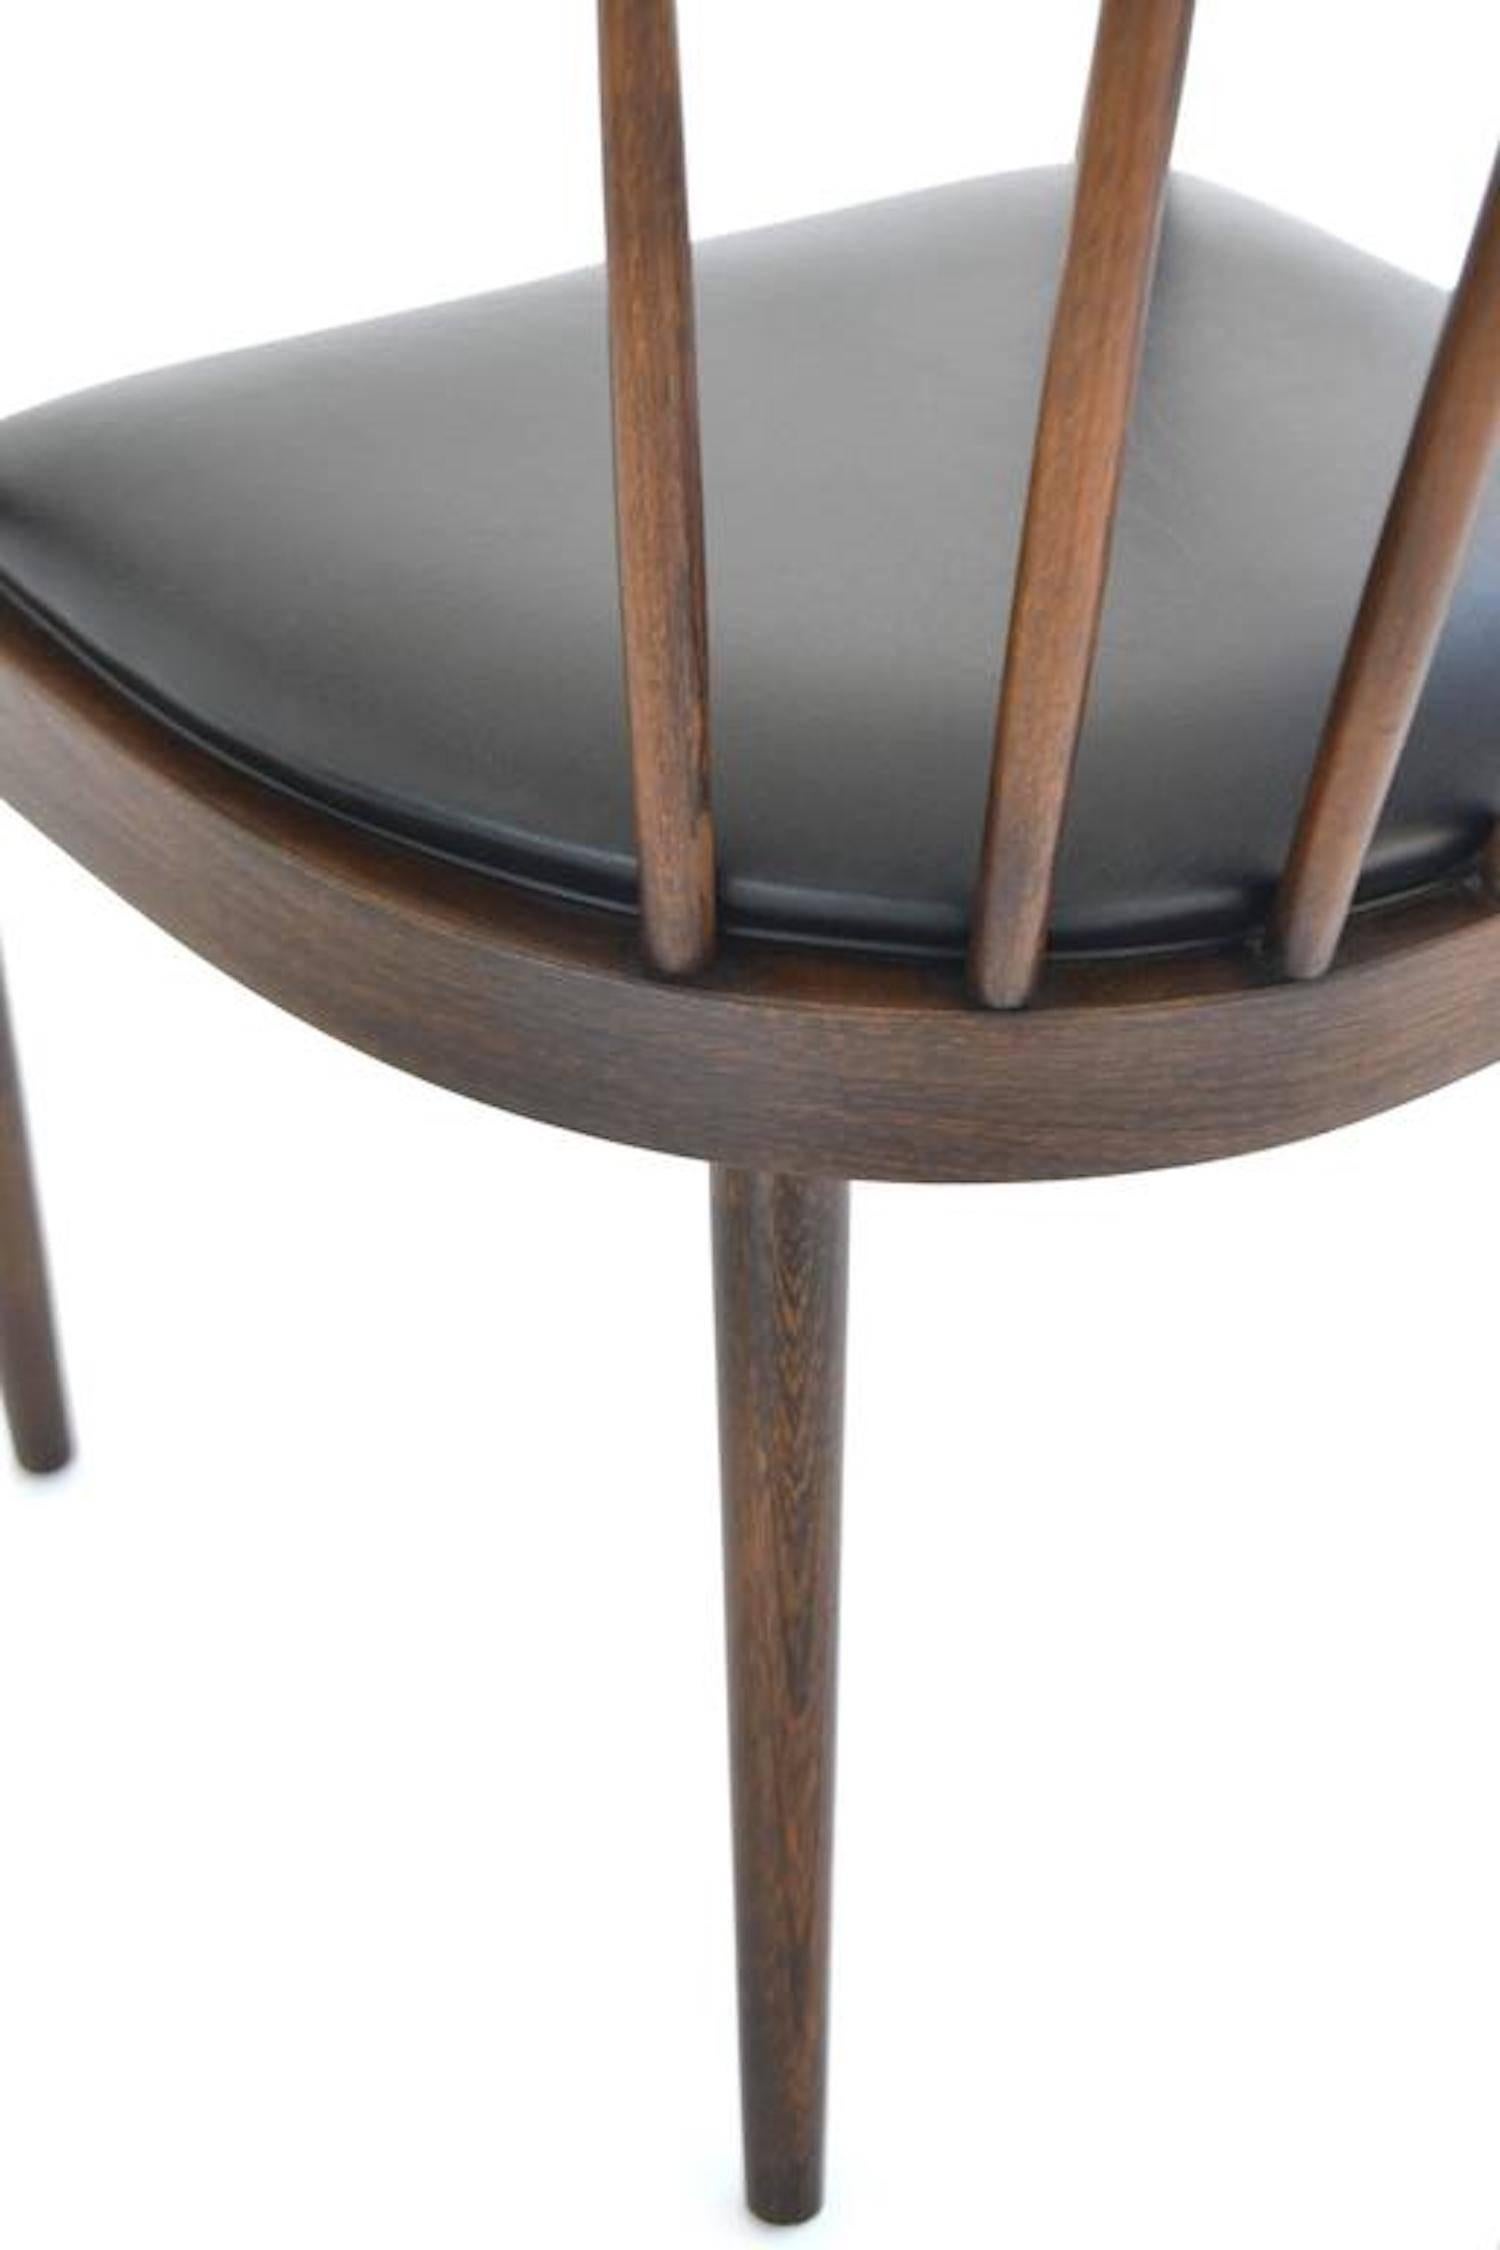 Mid-20th Century Midcentury Bentwood Side Chair by Lawrence Peabody for Richardson Nemschoff For Sale